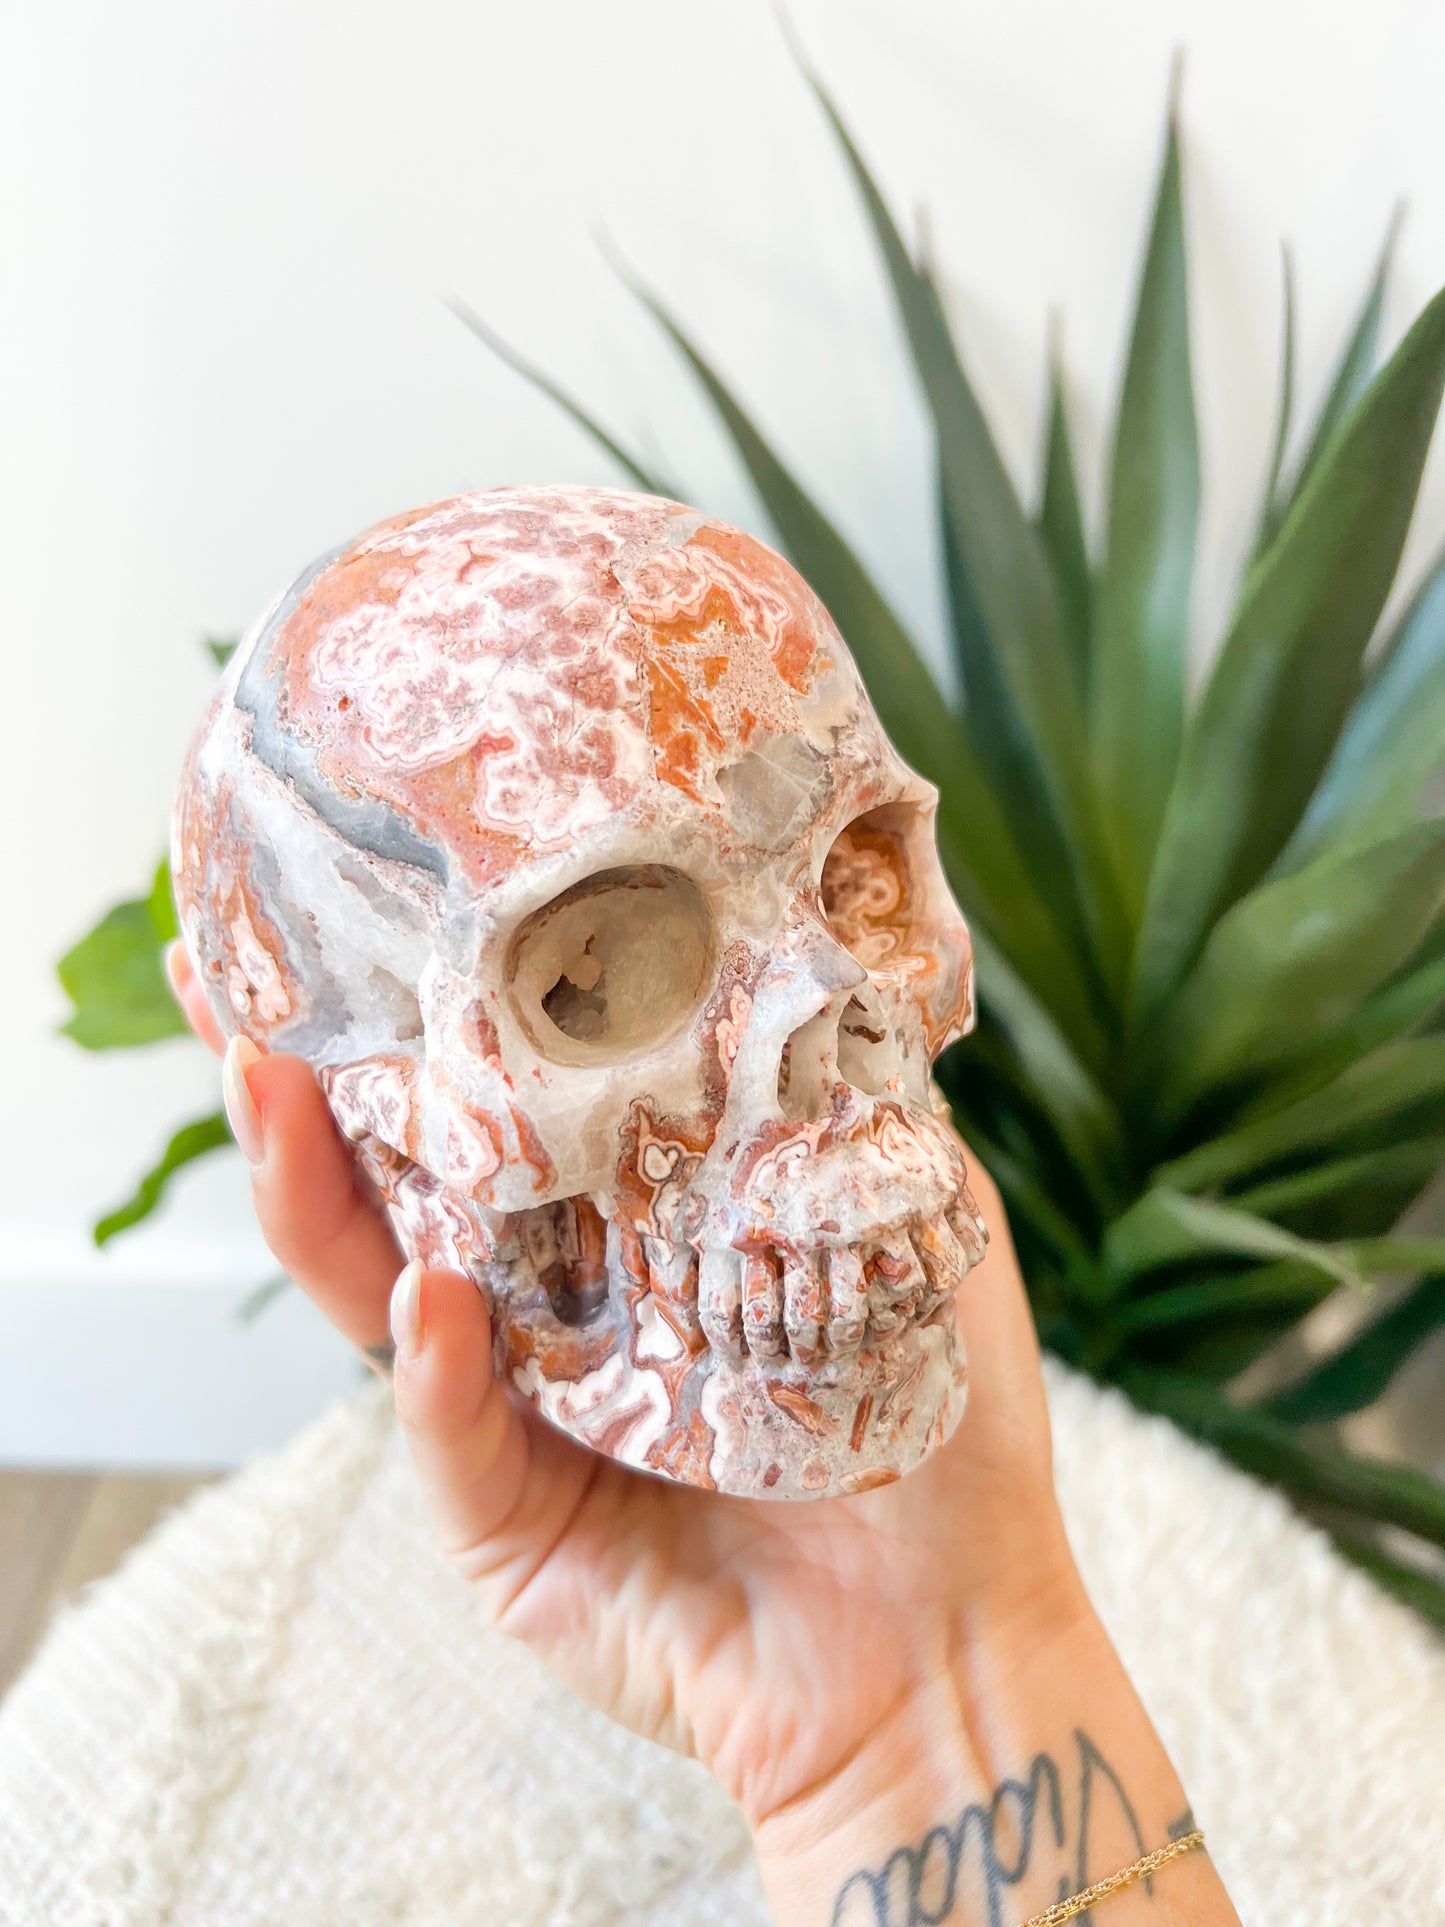 290 Red Crazy Lace Agate Skull